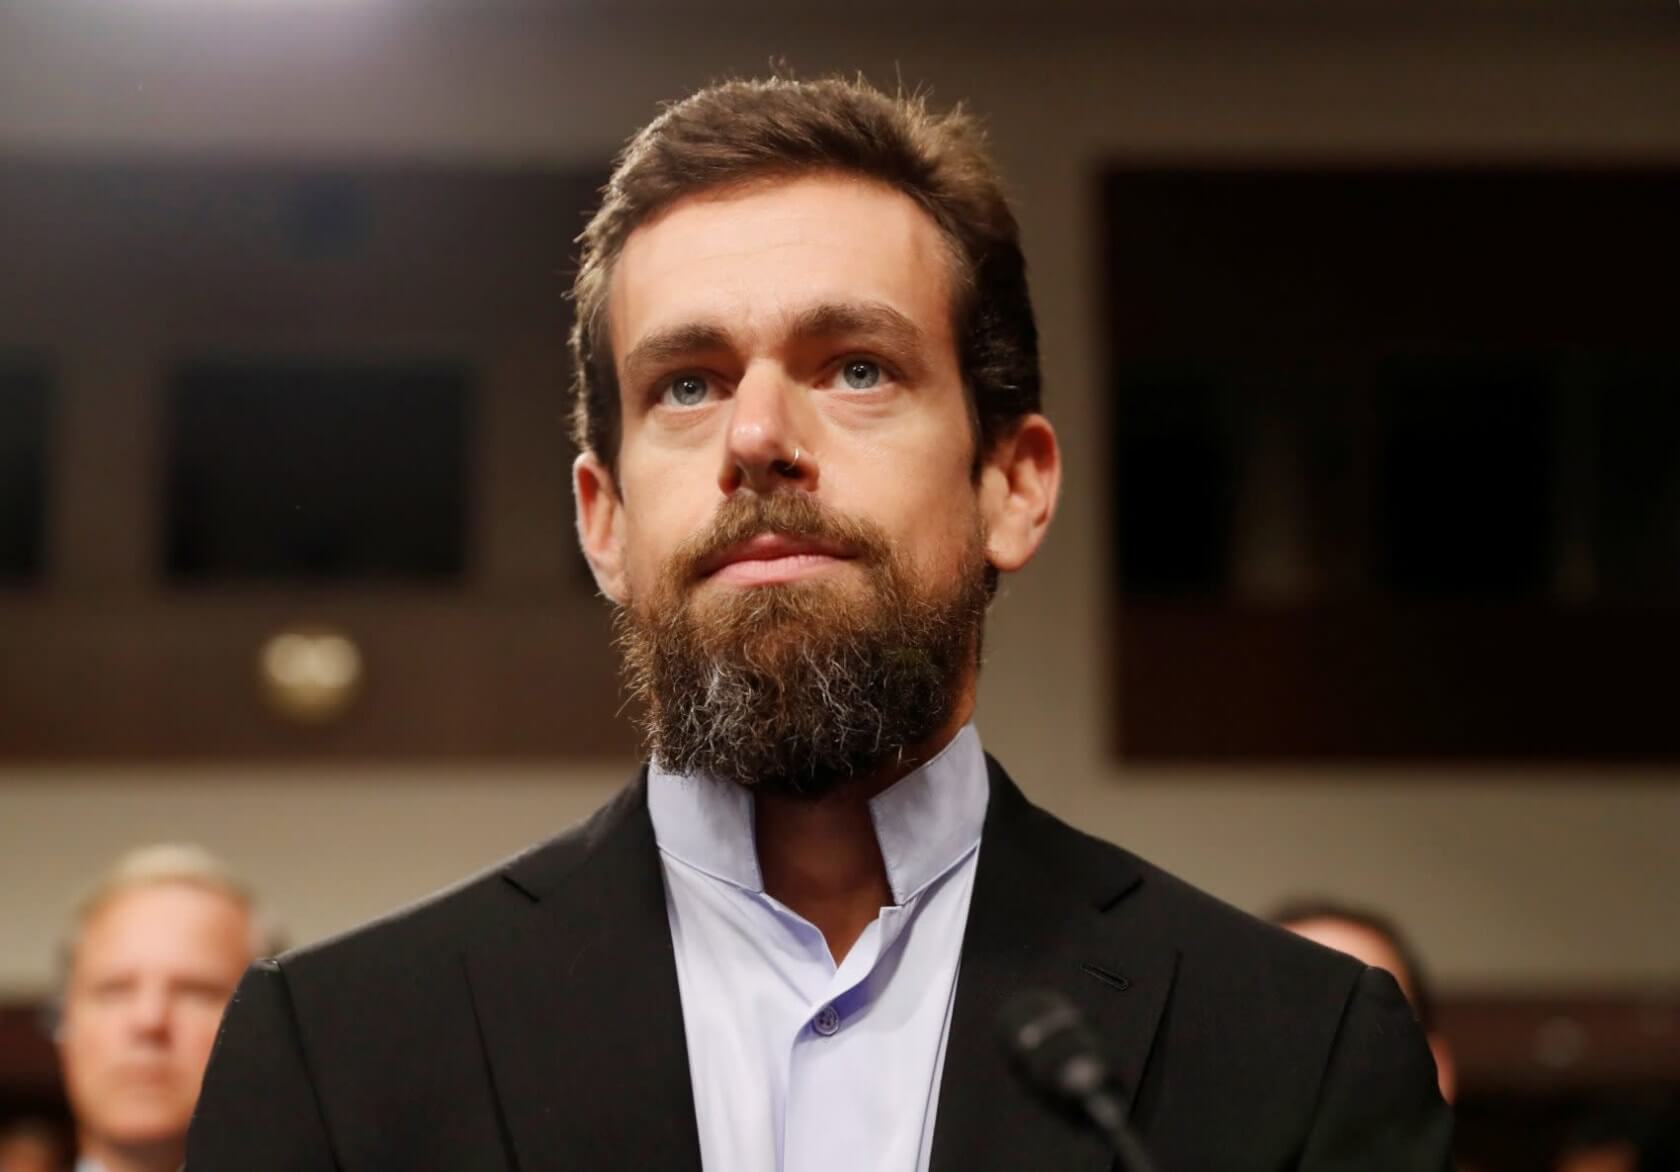 Twitter CEO claims shadow banning of 600,000 accounts was due to faulty 'filtering' algorithms